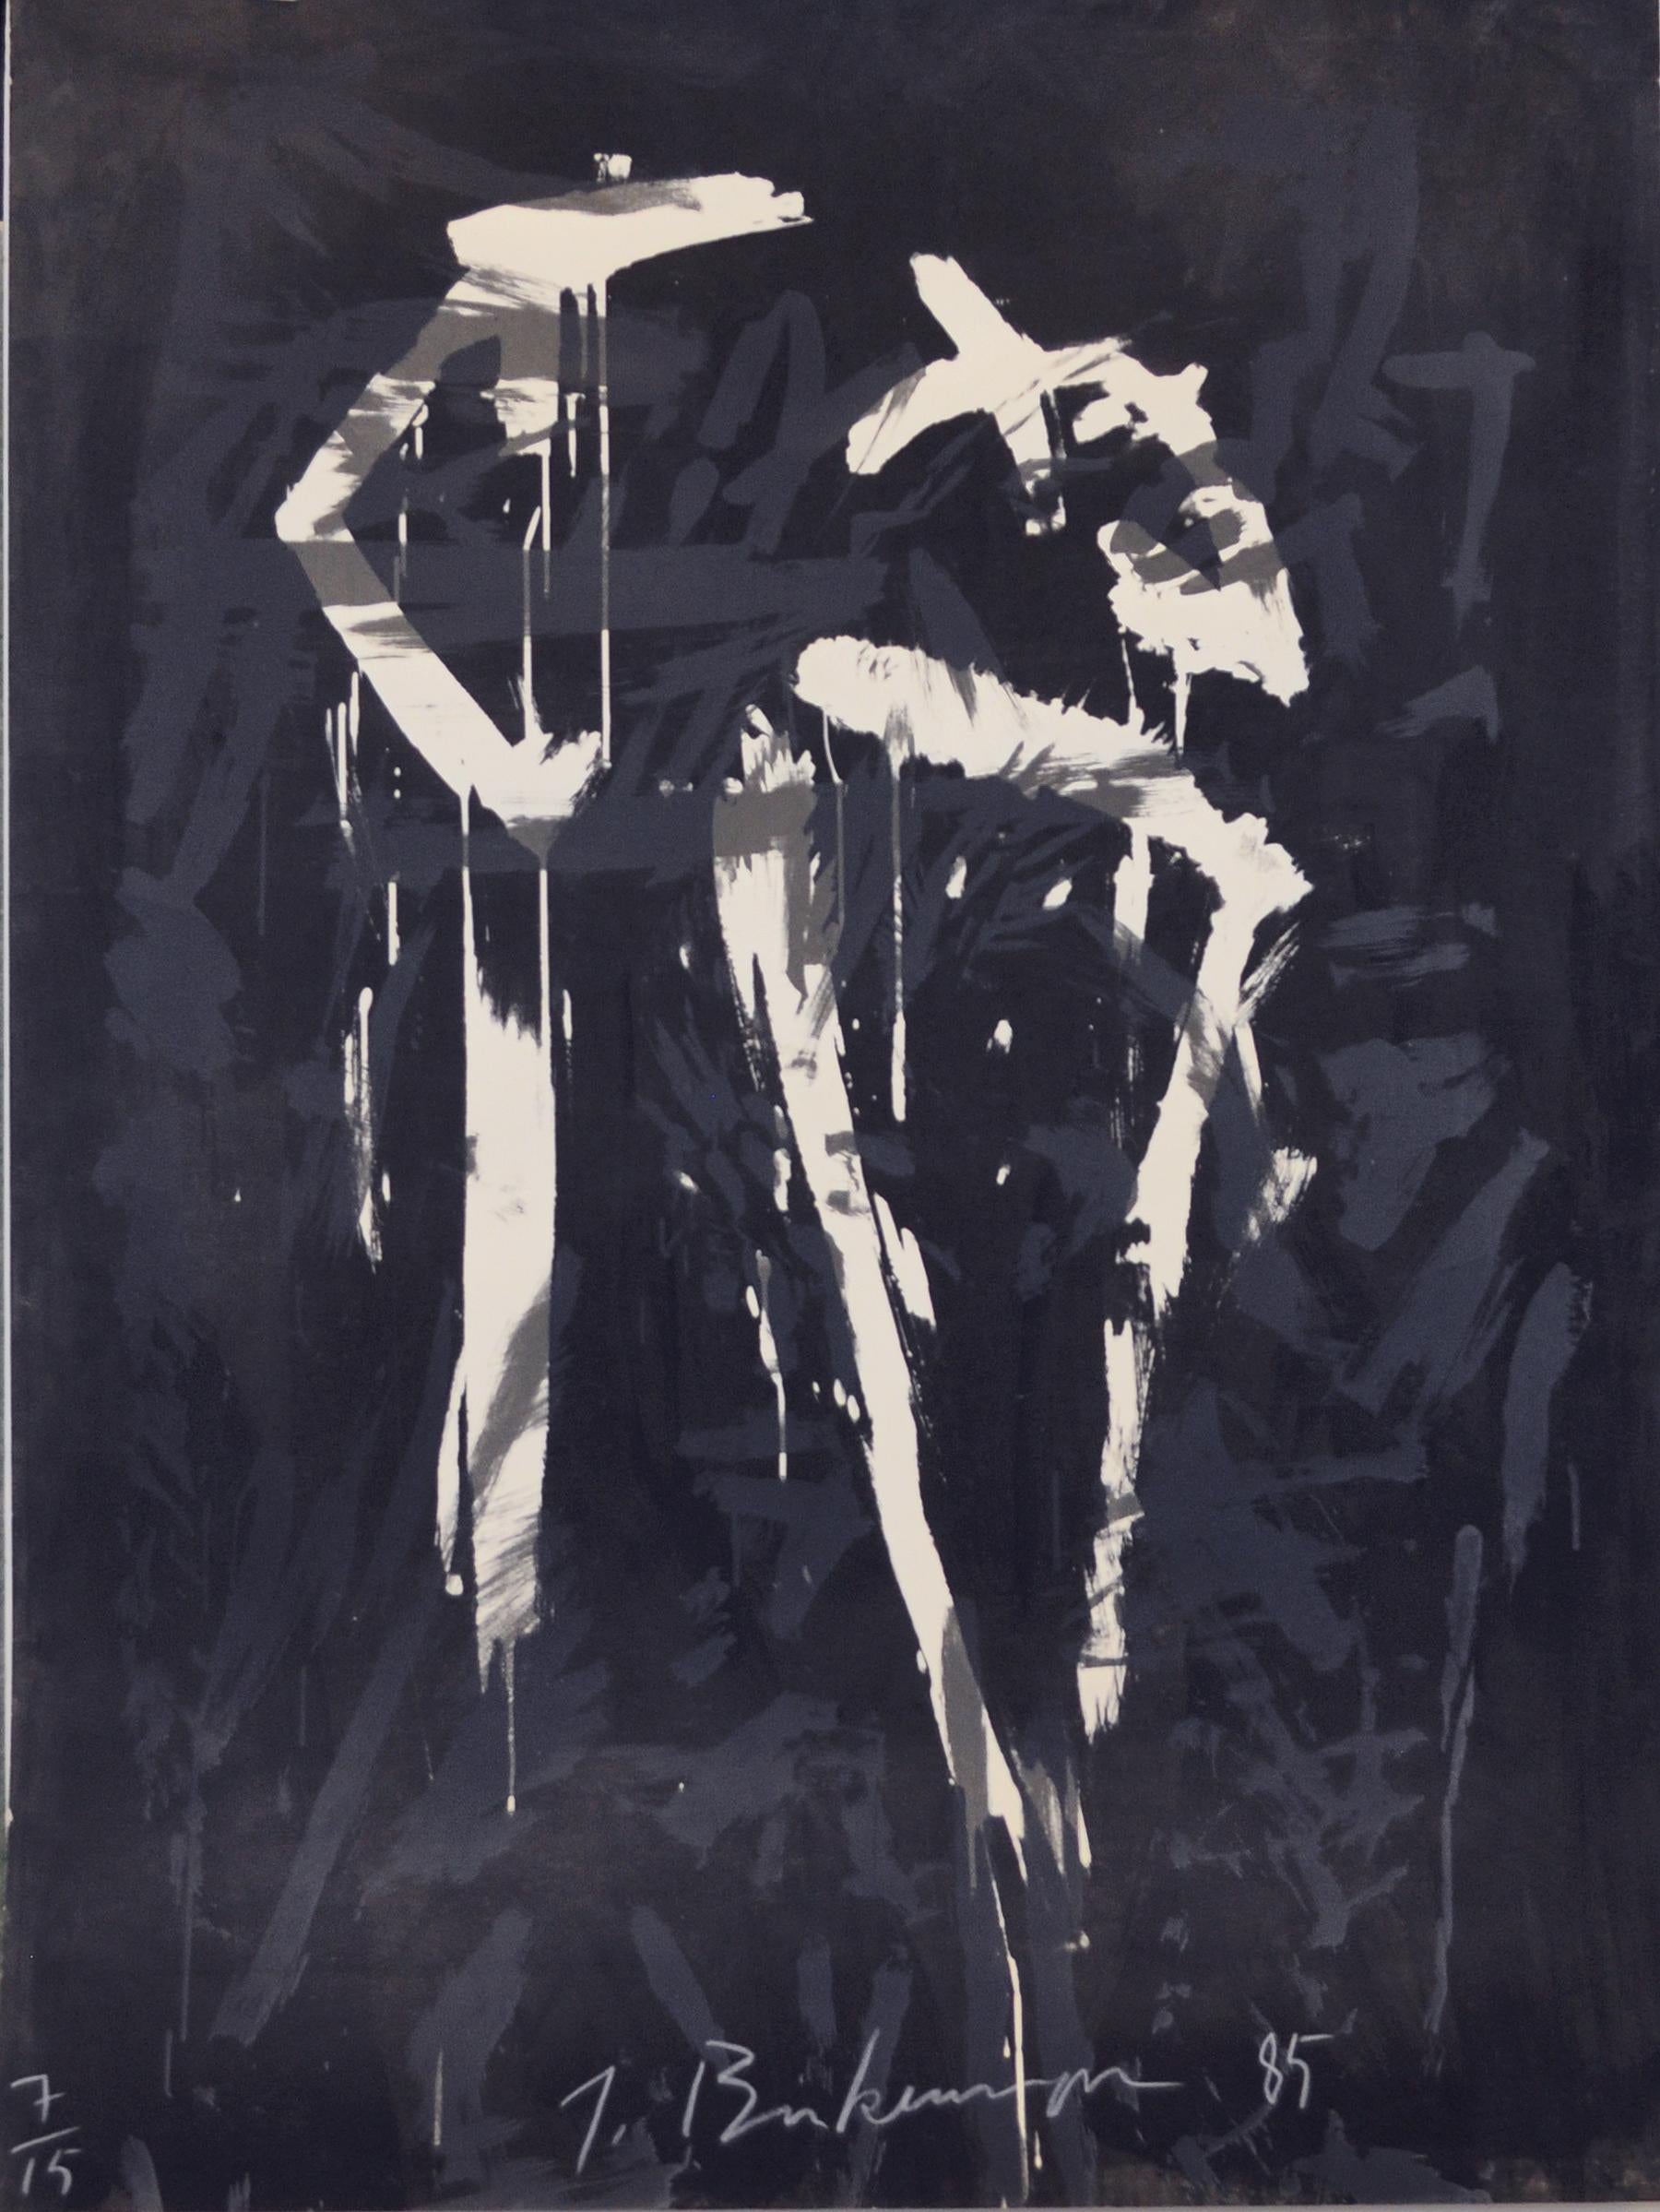 Large Screen Print by the Danish artist Jens Birkemose
Signed and numbered 7/15, 1985. 
 Art size - Width: 120 cm x height: 160 cm.
Unframed, can be framed according to your wishes.

Jens Birkemose (born 1943) counts among Denmark's most versatile